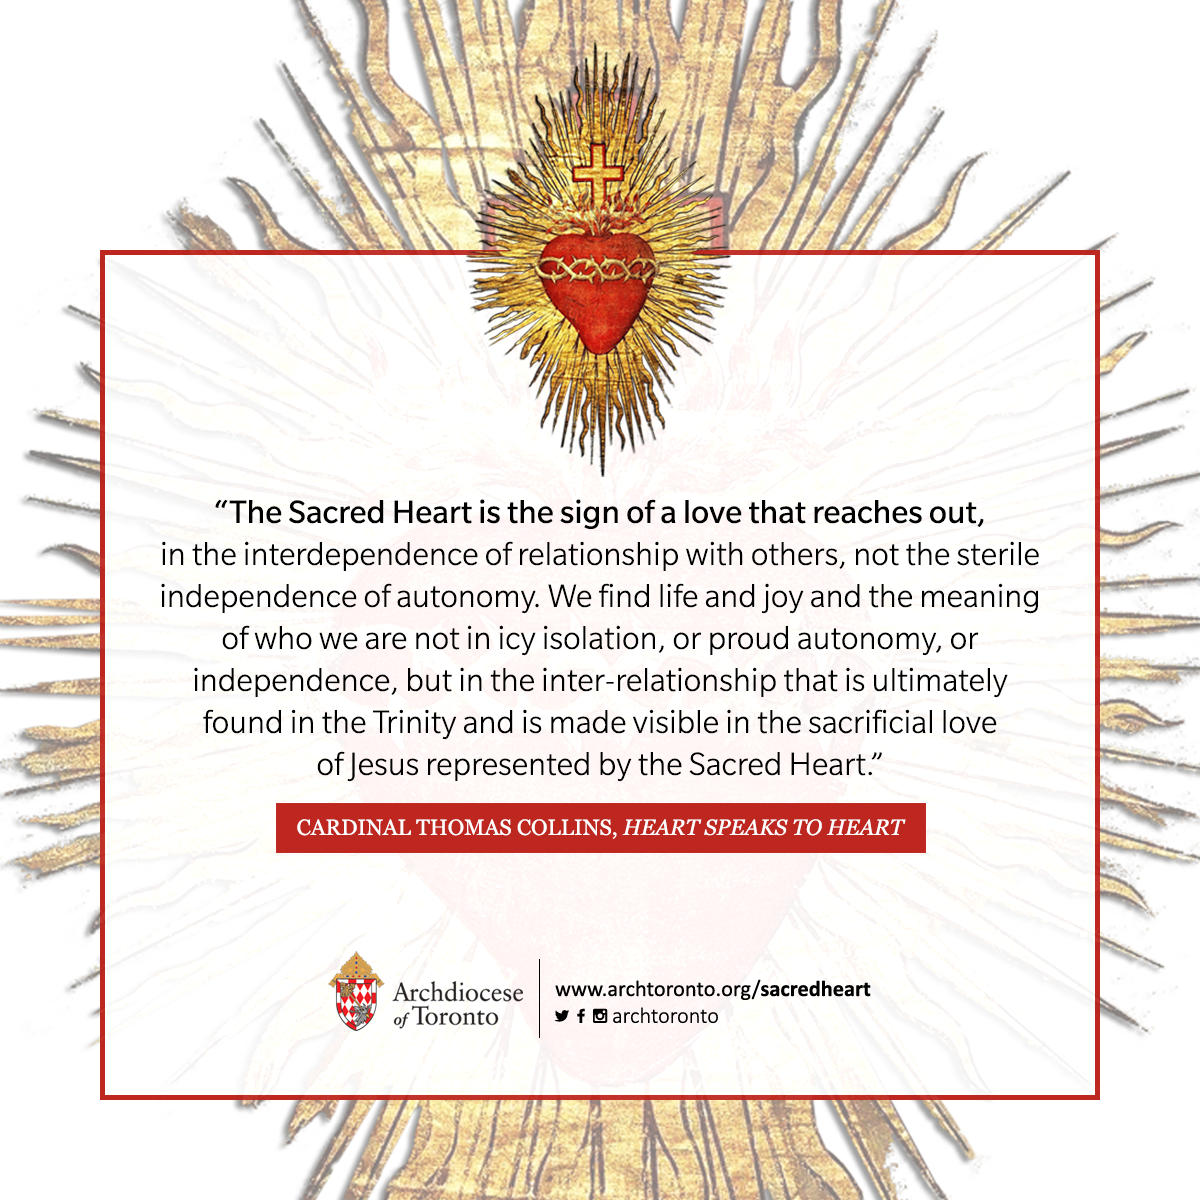 The Sacred Heart is the sign of a love that reaches out, in the interdependence of relationship with others, not the sterile independence of autonomy. We find life and joy and the meaning of who we are not in icy isolation, or proud autonomy, or independence, but in the inter-relationship that is ultimately found in the Trinity and is made visible in the sacrificial love of Jesus represented by the Sacred Heart.